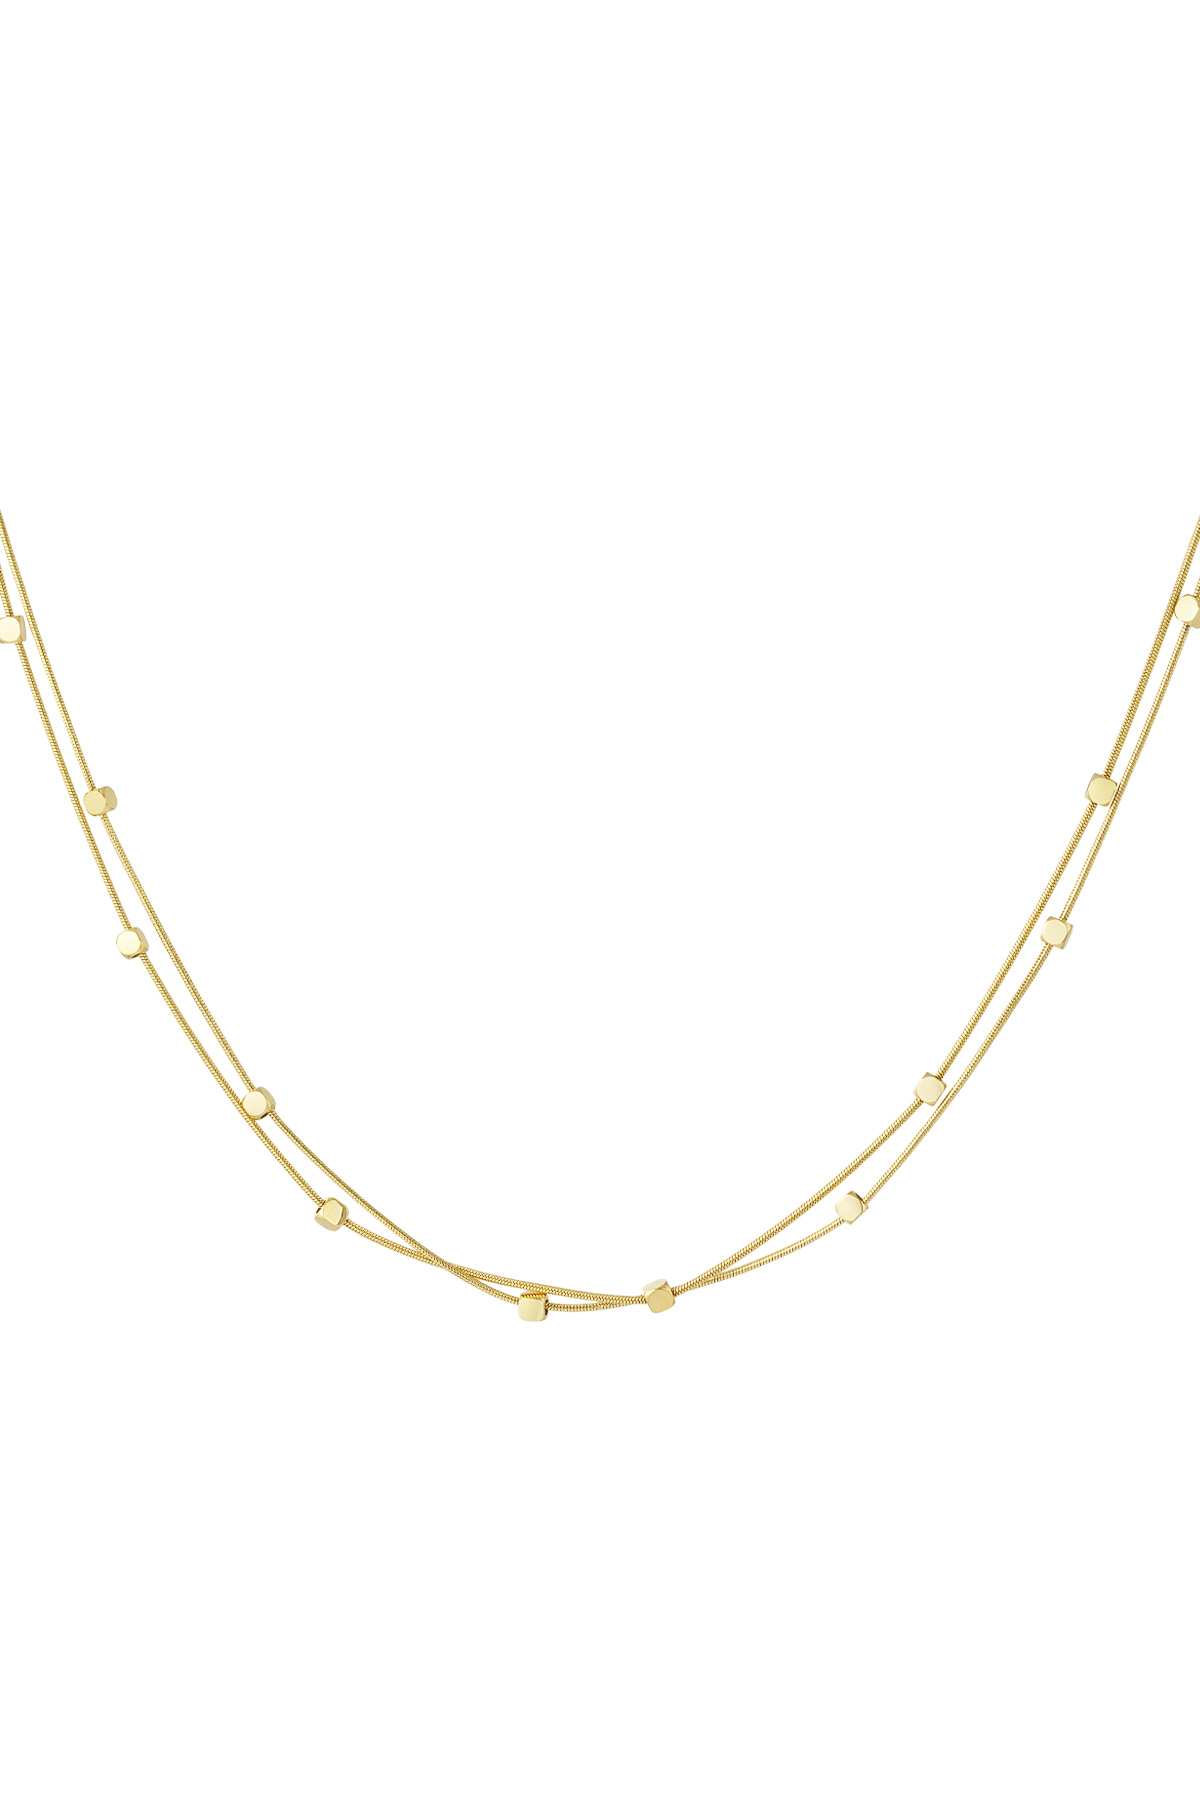 Double chain with coins - gold